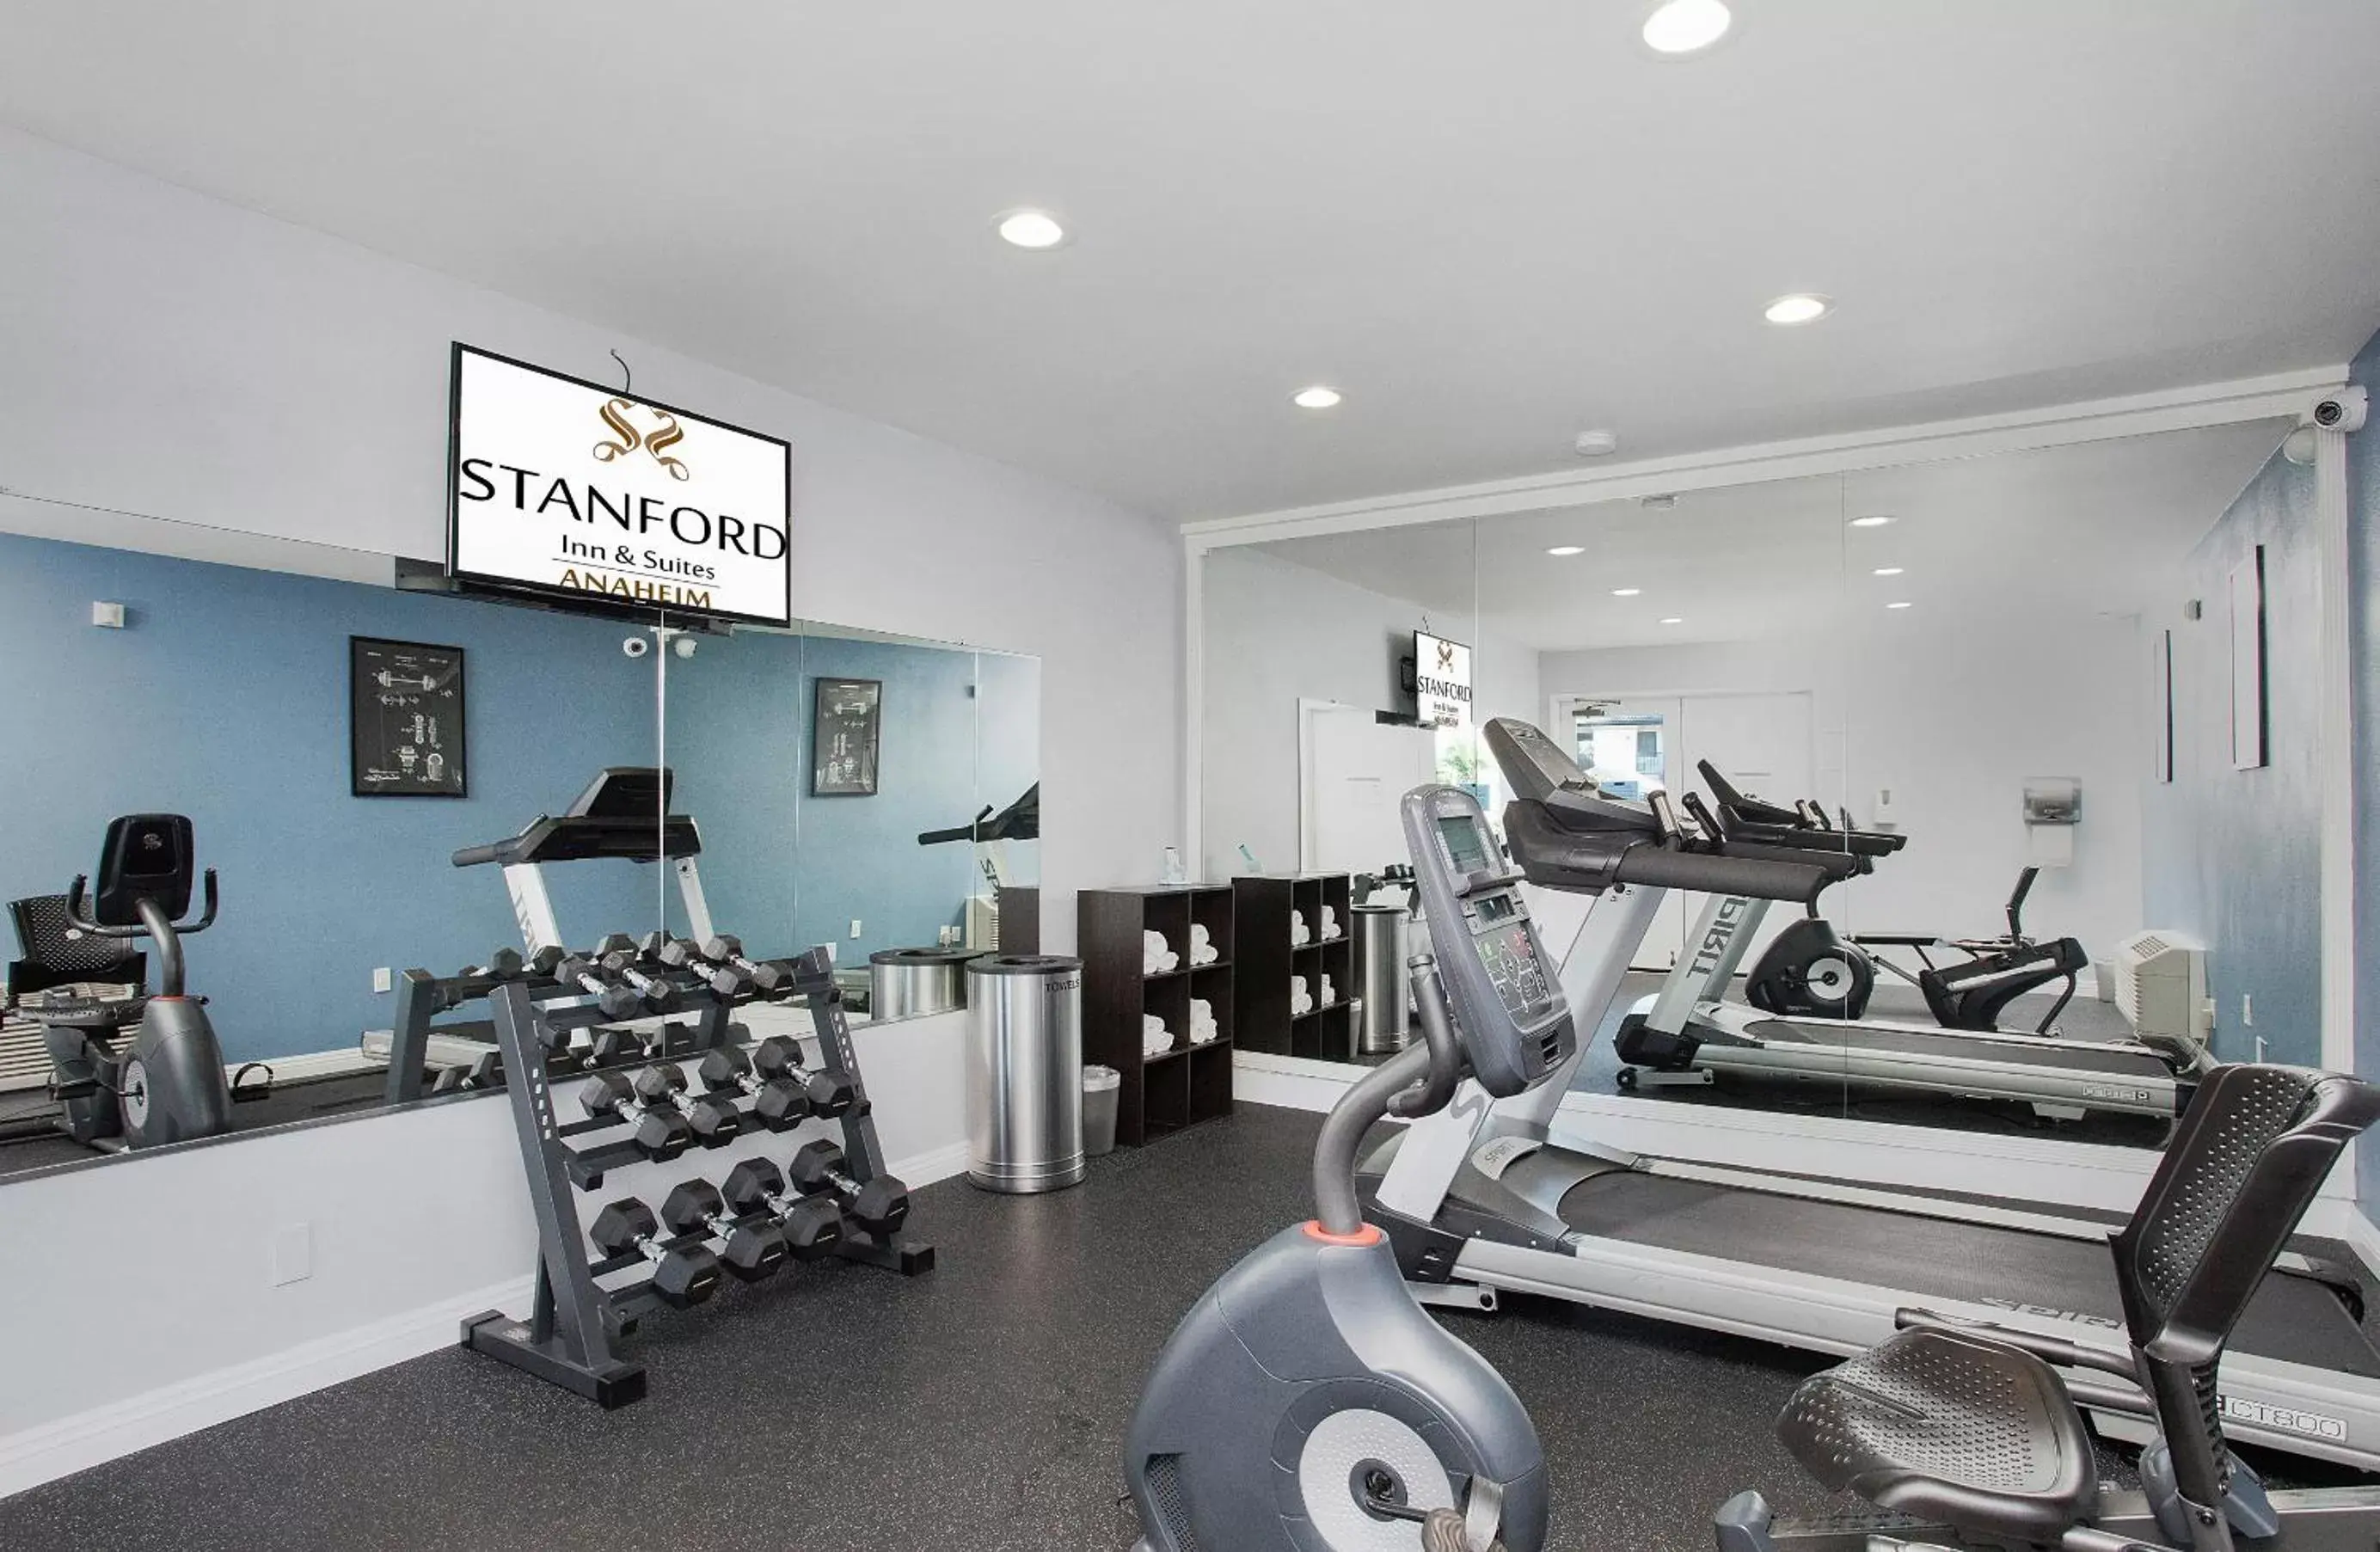 Fitness centre/facilities, Fitness Center/Facilities in Stanford Inn & Suites Anaheim